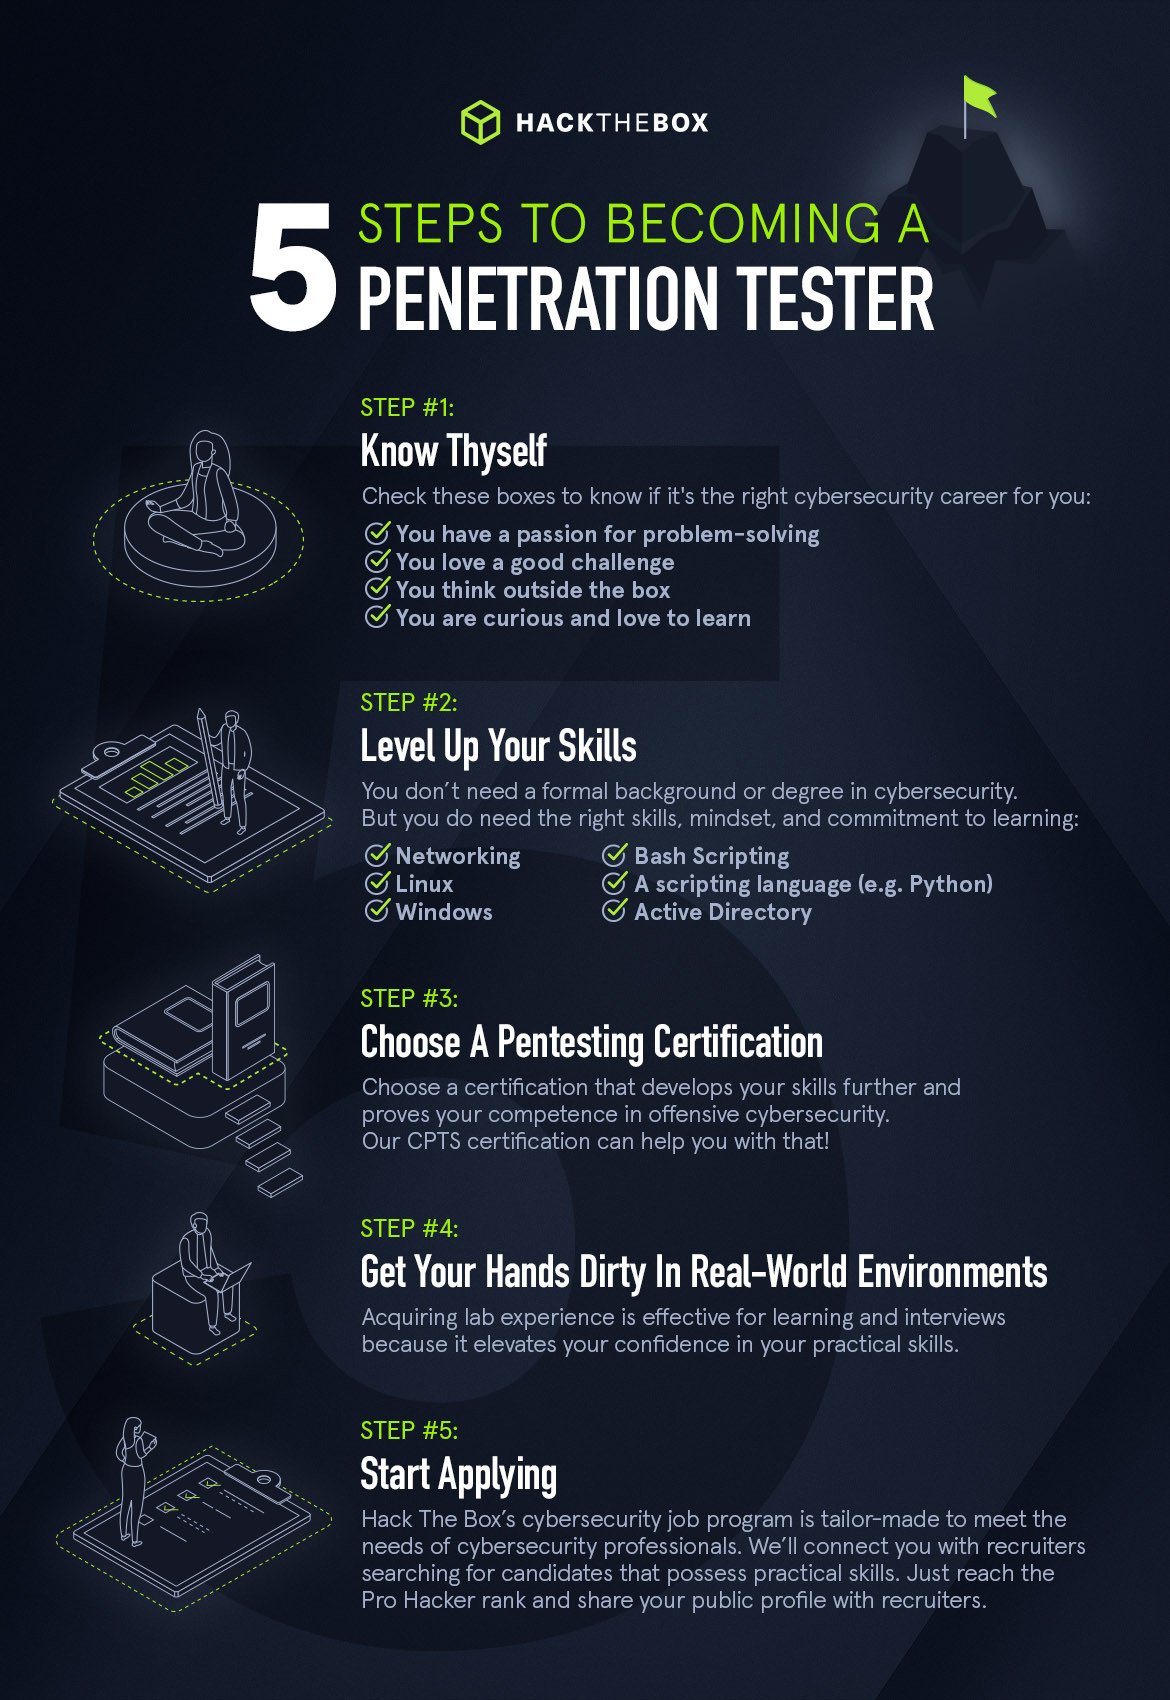 How to become a penetration tester: 5 Steps